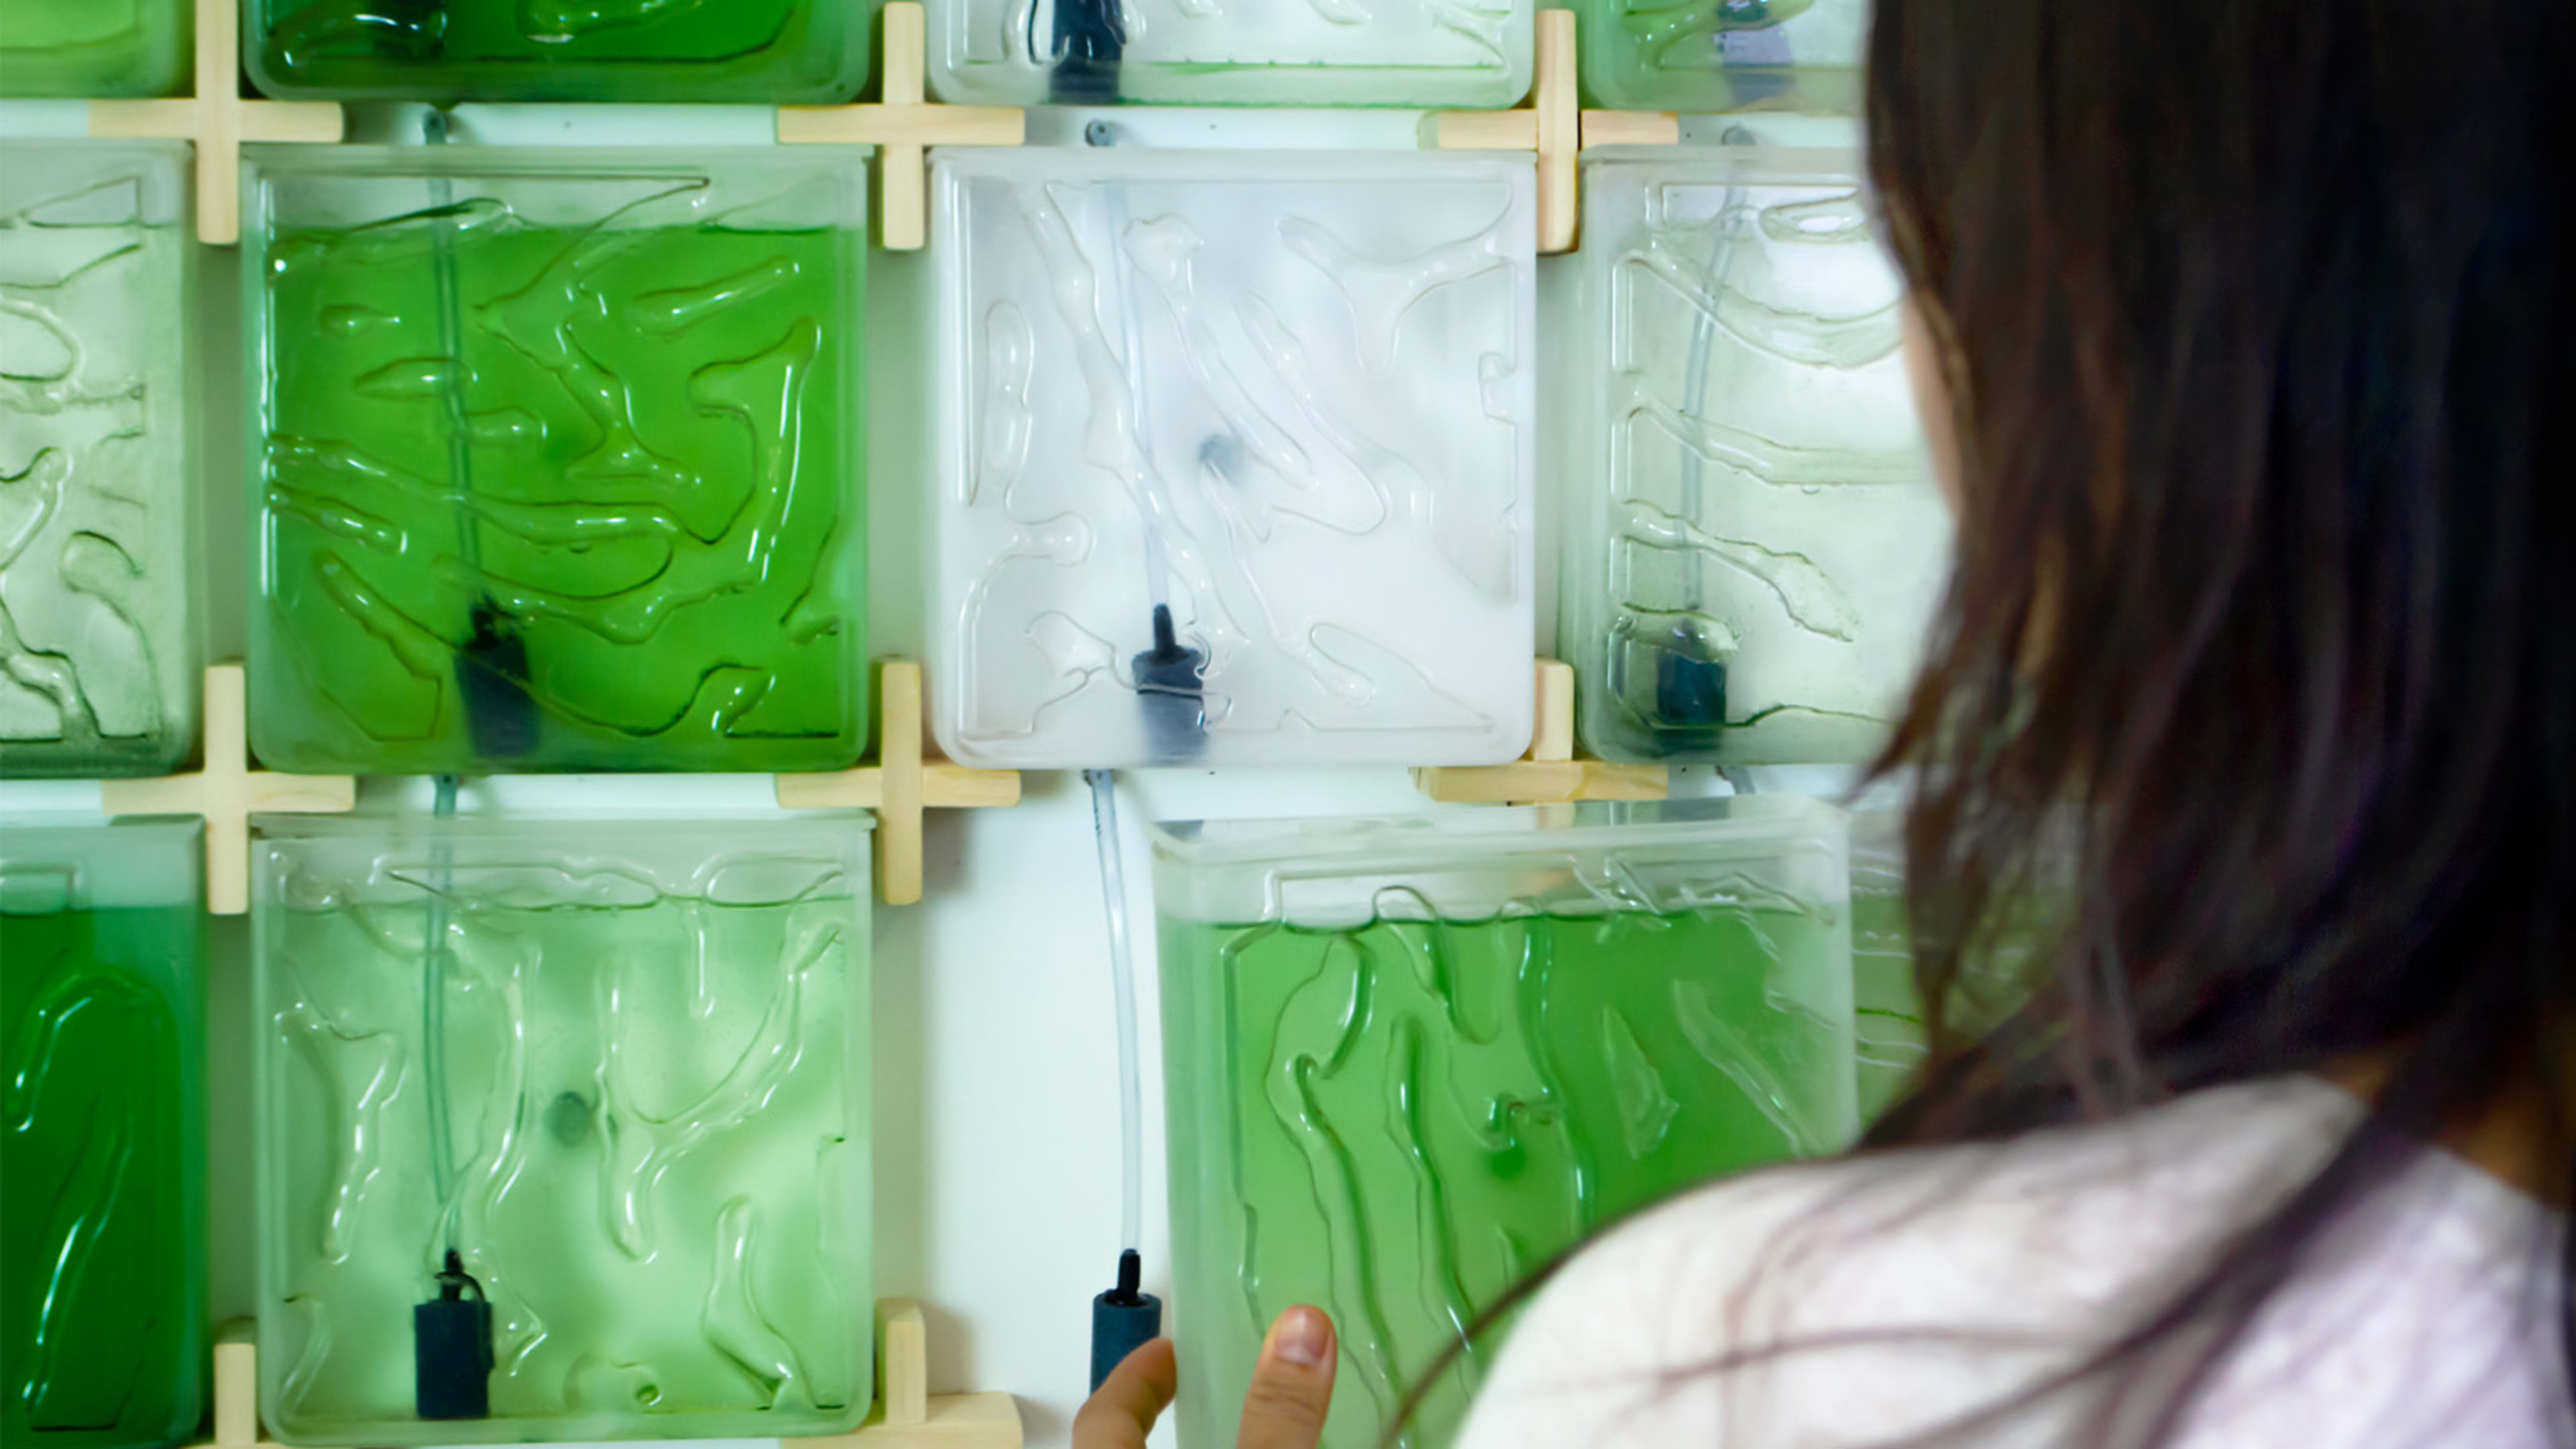 This kit makes it shockingly easy (and pretty) to farm your own algae at home